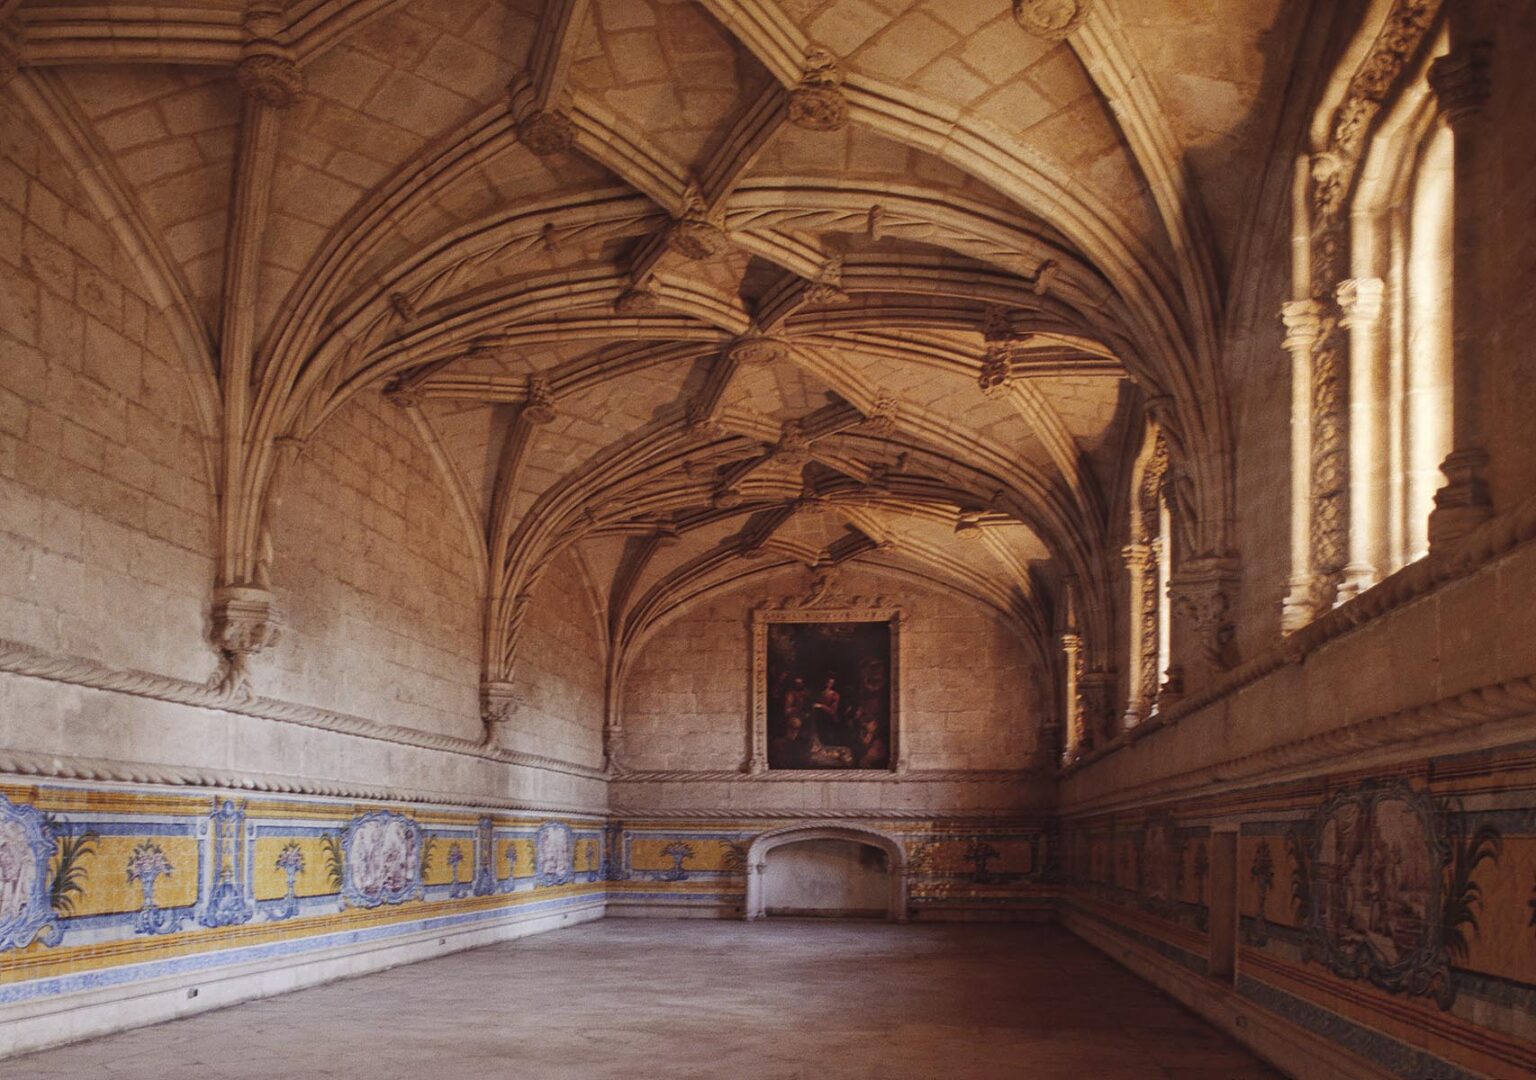 Giant Hall in the CLOISTERS of the MONASTERY OF JERONIMOS in the BELEM DISTRICT - LISBON, PORTUGAL